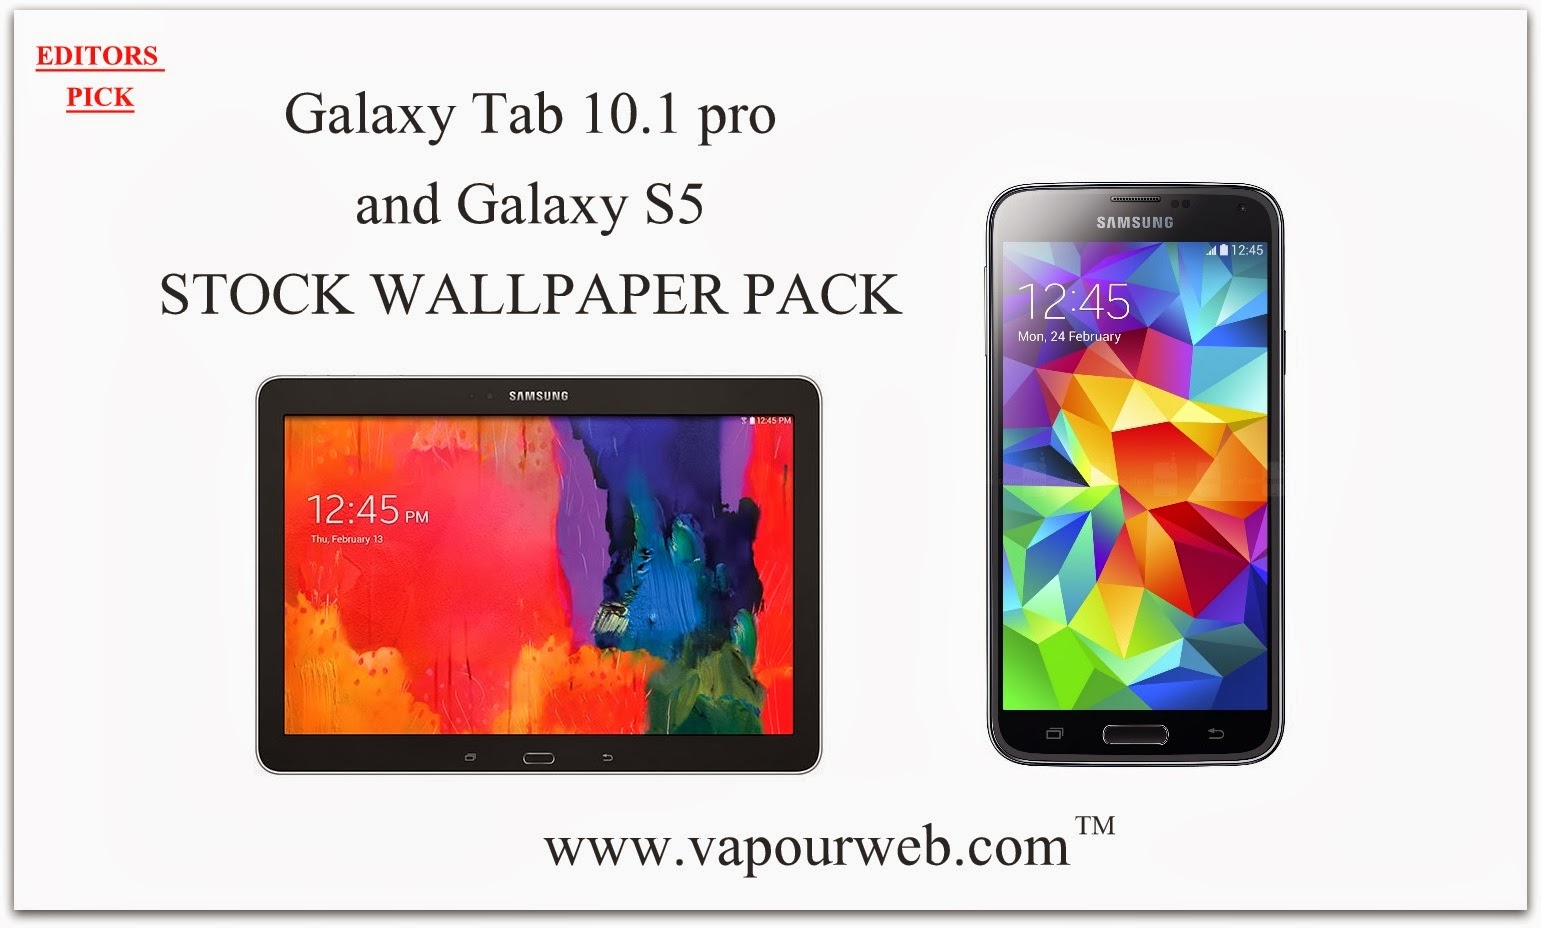 Vapourweb Galaxy Note S5 Stock Wallpaper Pack